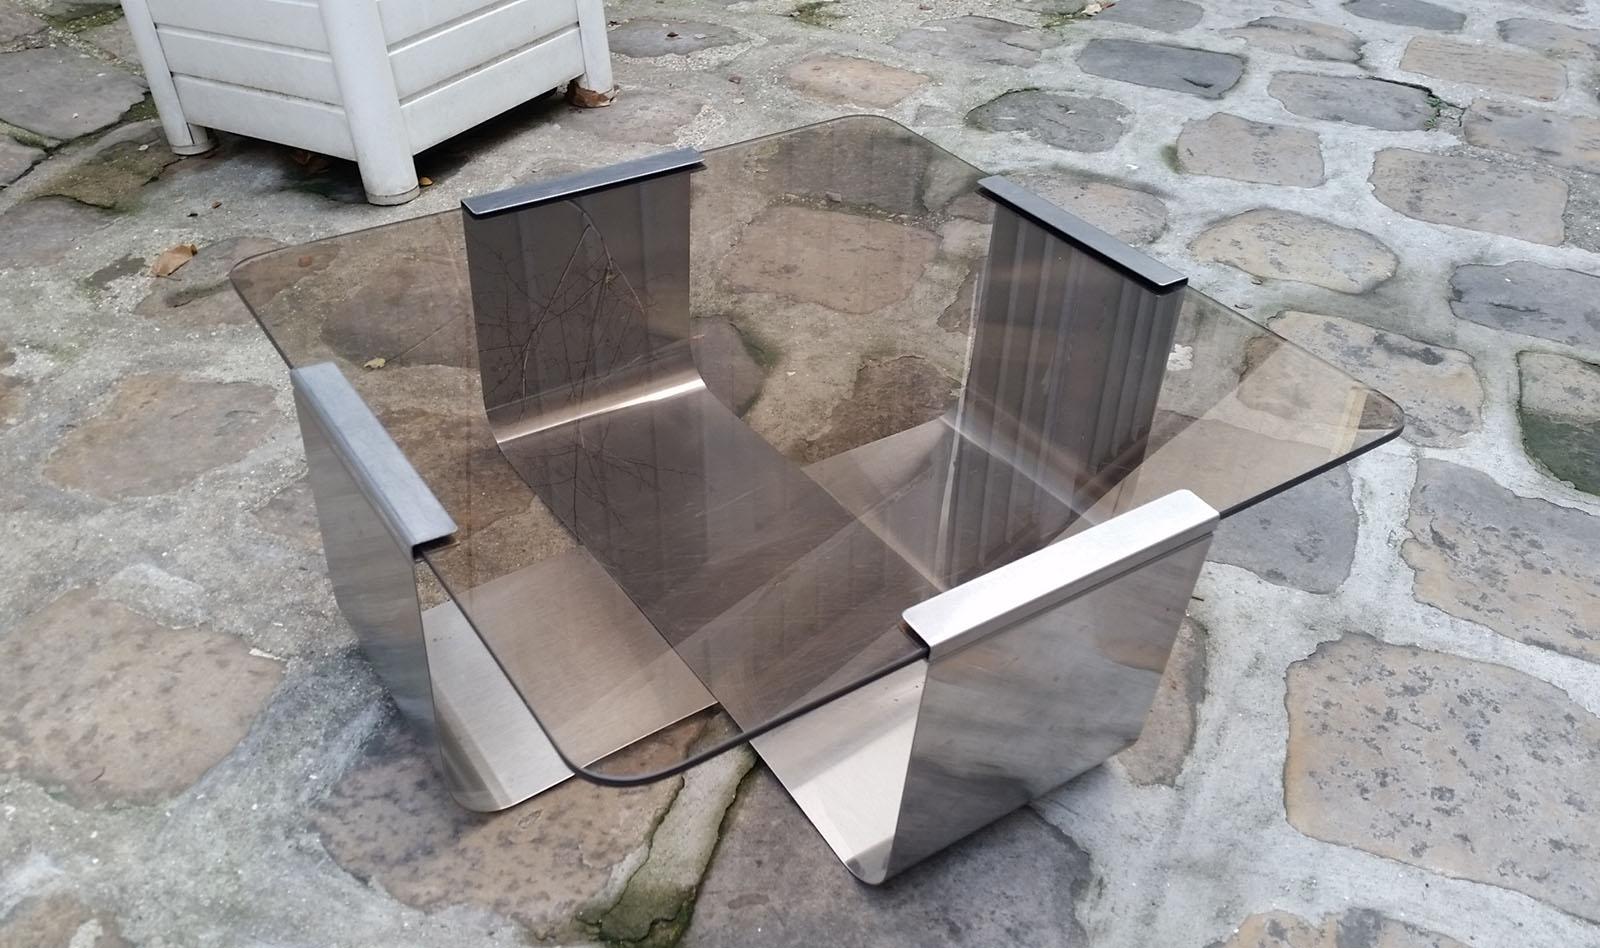 Francois Monnet
coffee table for living room / side table
stainless steel and glass,
circa 1975
Size: 55 x 55 x 23 cms
690 Euros.